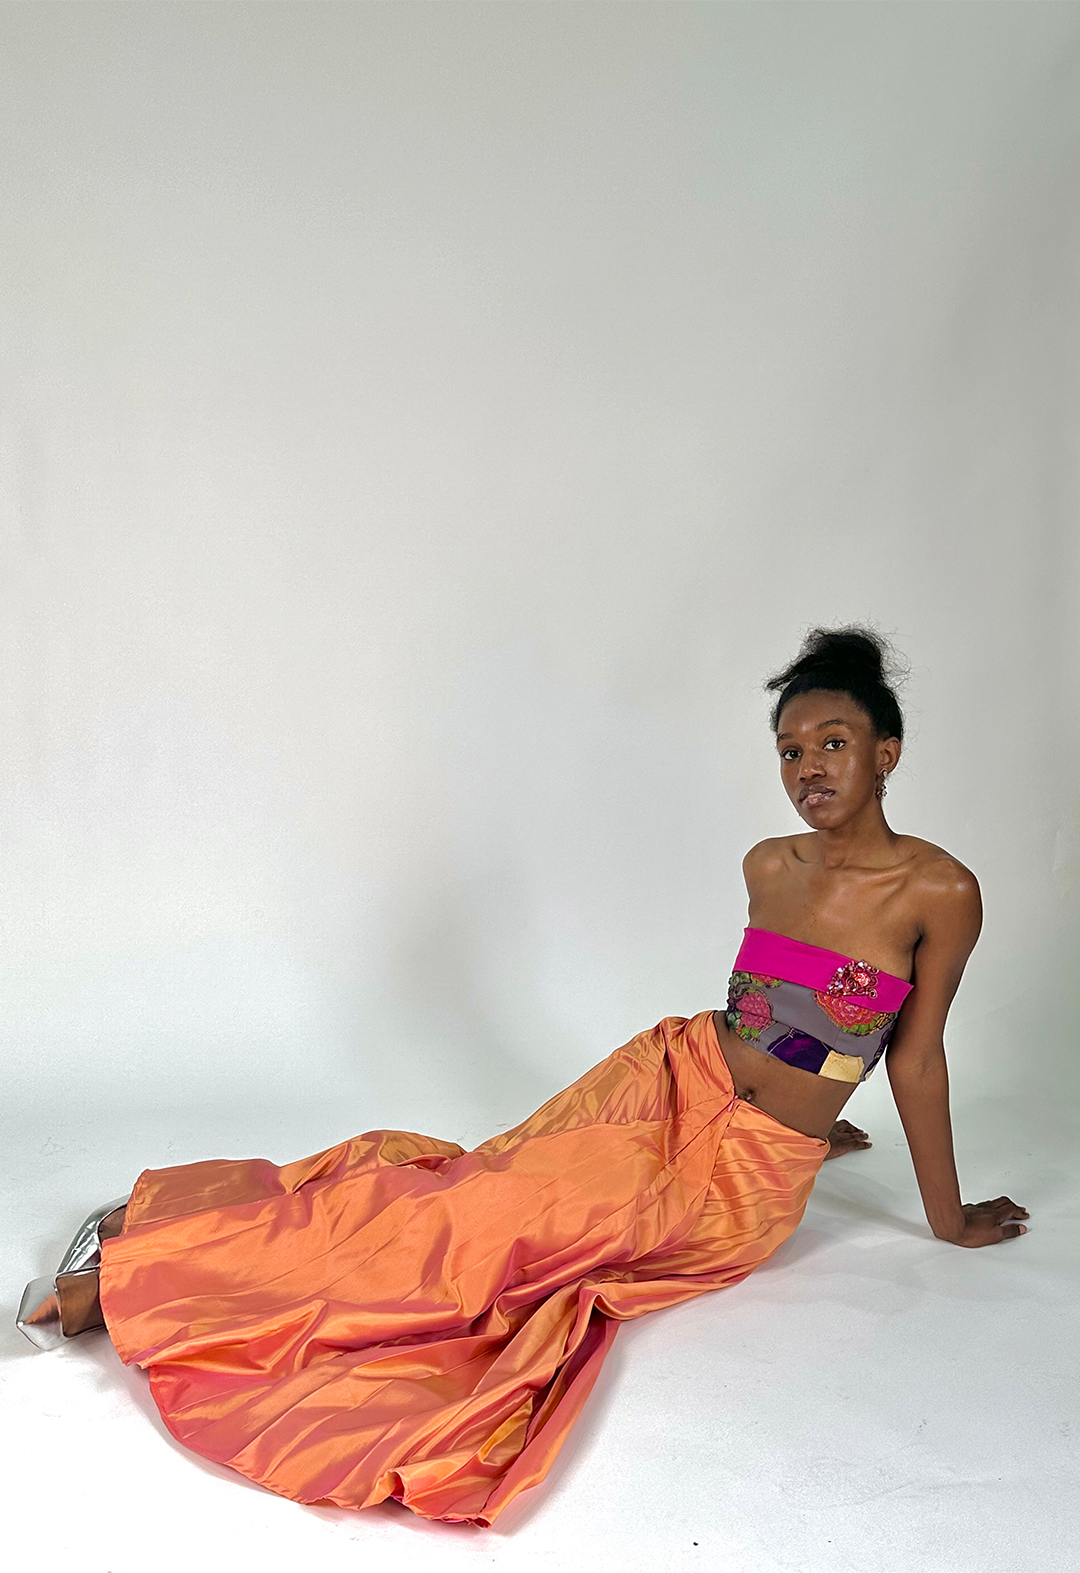 Model lays on side with hands propping them up on the floor, while the skirt is placed around, showcasing the flow of the pleats and the two-toned nature of the taffeta fabric.